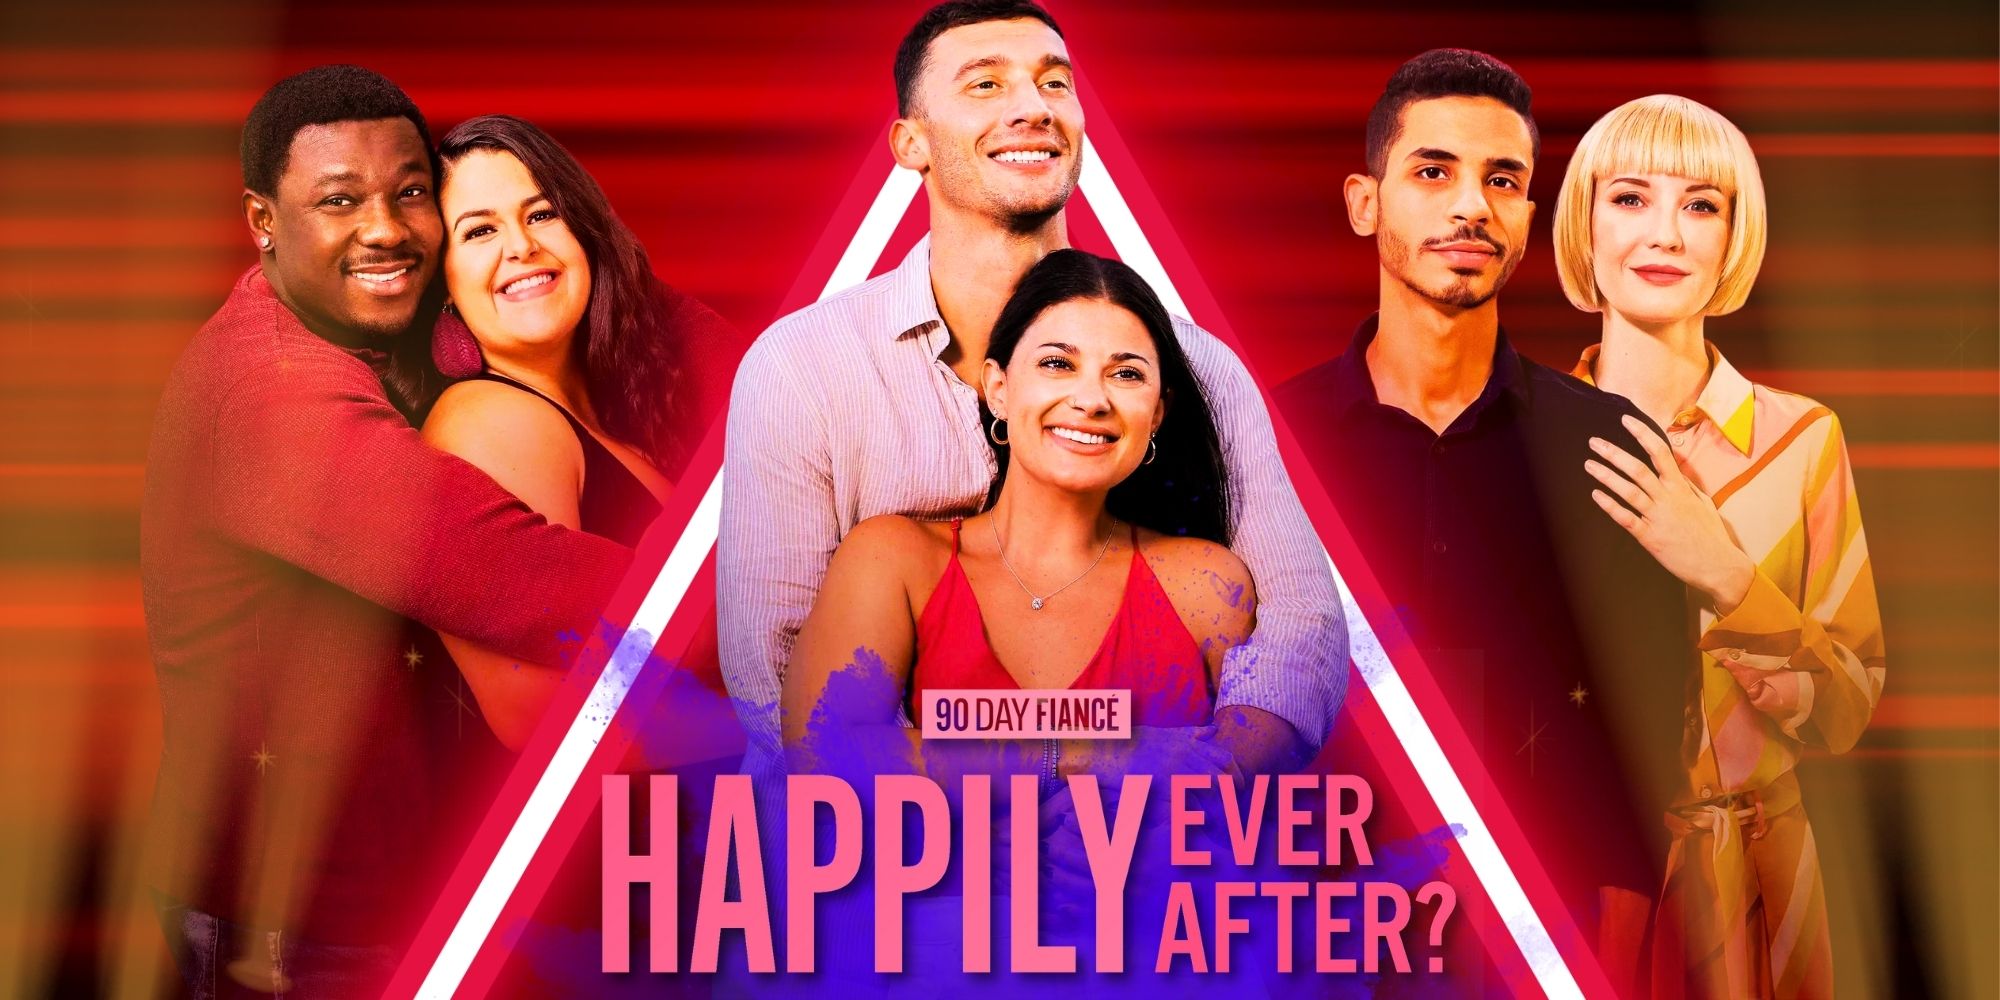 90 Day Fiancé: Happily Ever After? Season 8 Cast